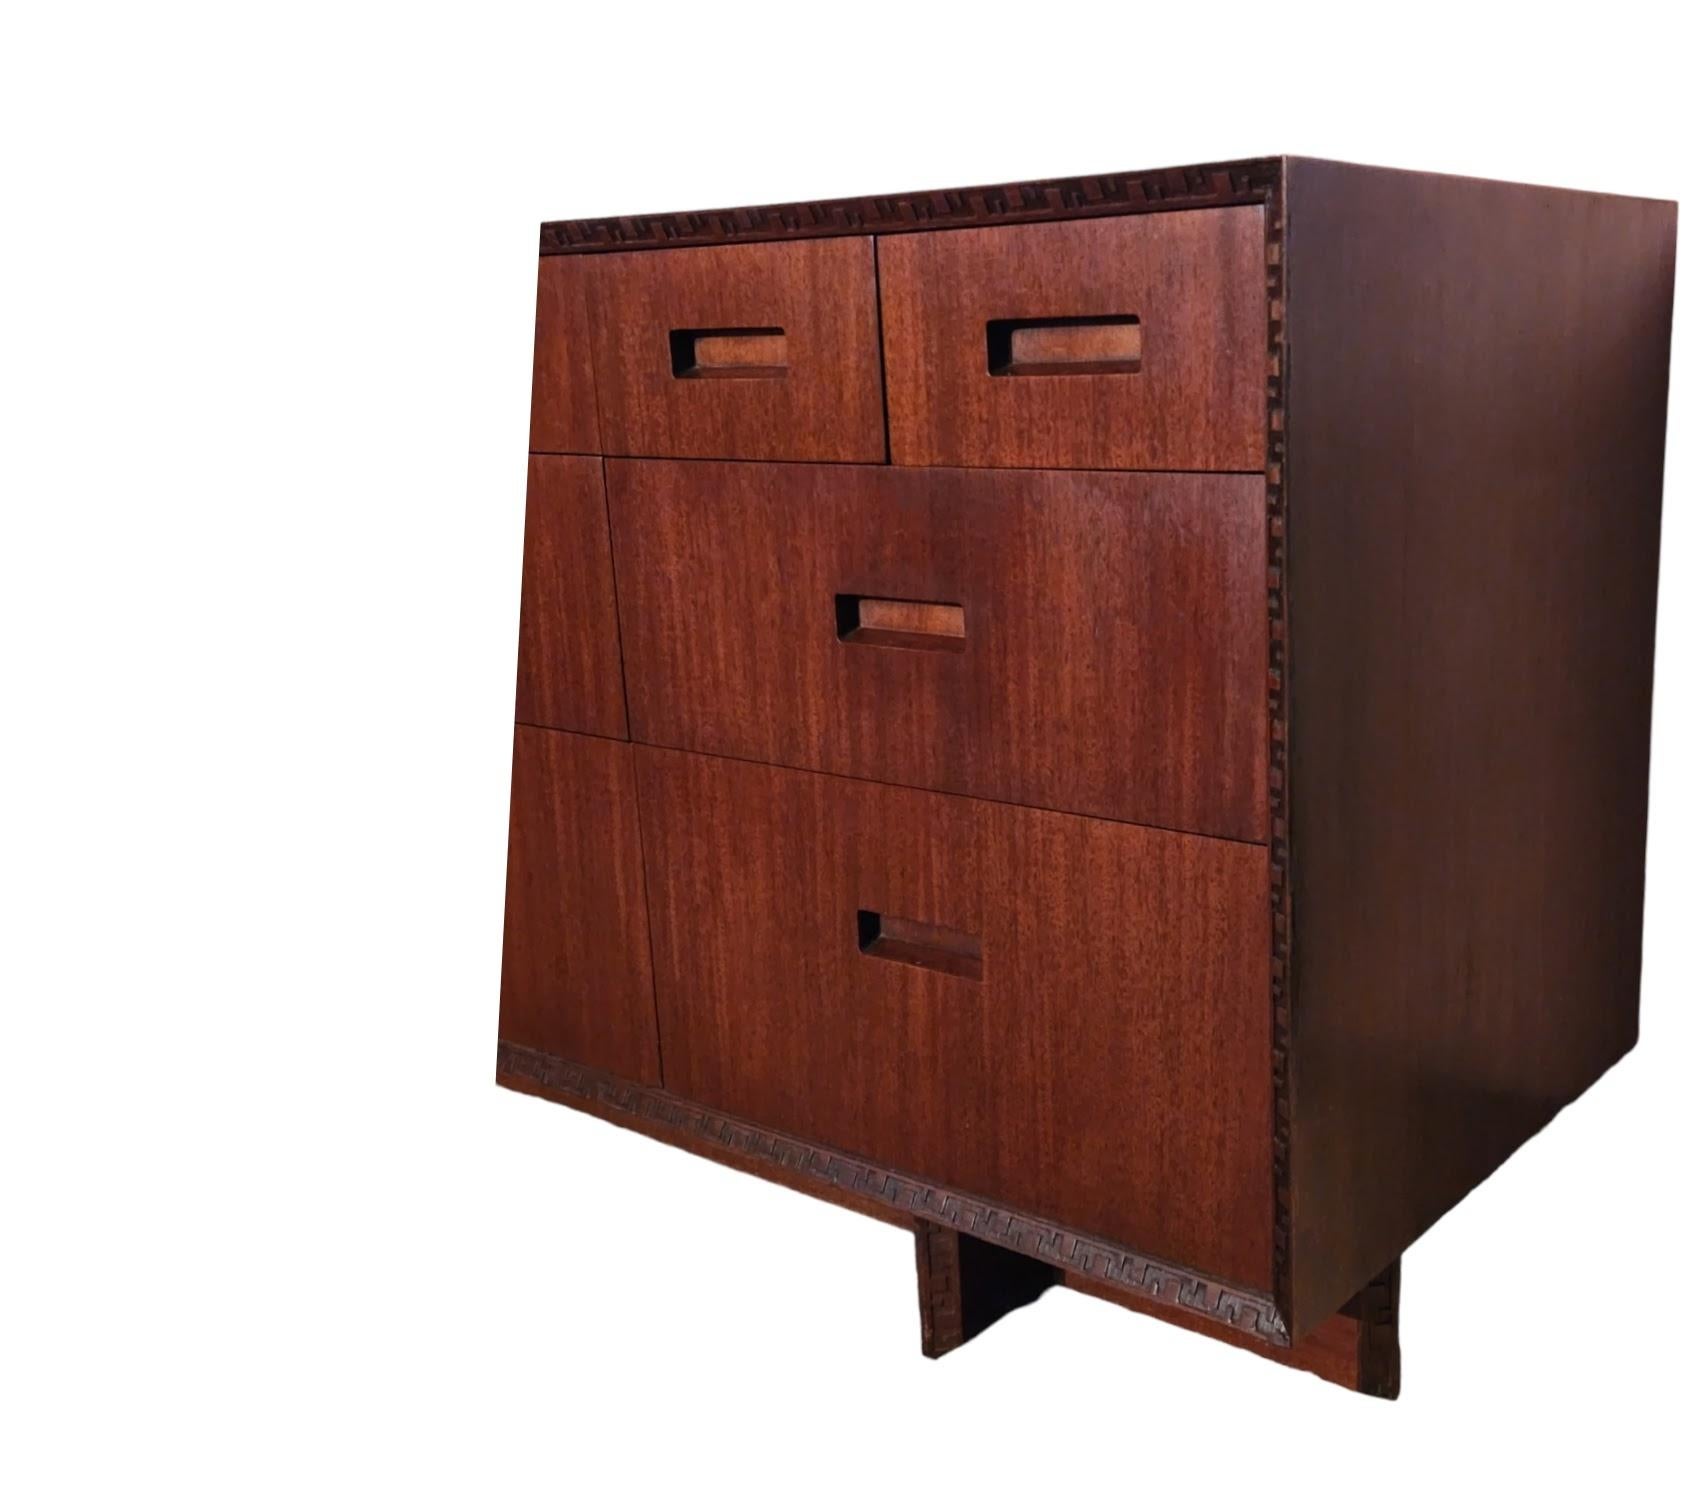 Frank Lloyd Wright Mahogany Dresser Sideboard Taliesin Heritage Henredon 1955 In Good Condition For Sale In Camden, ME